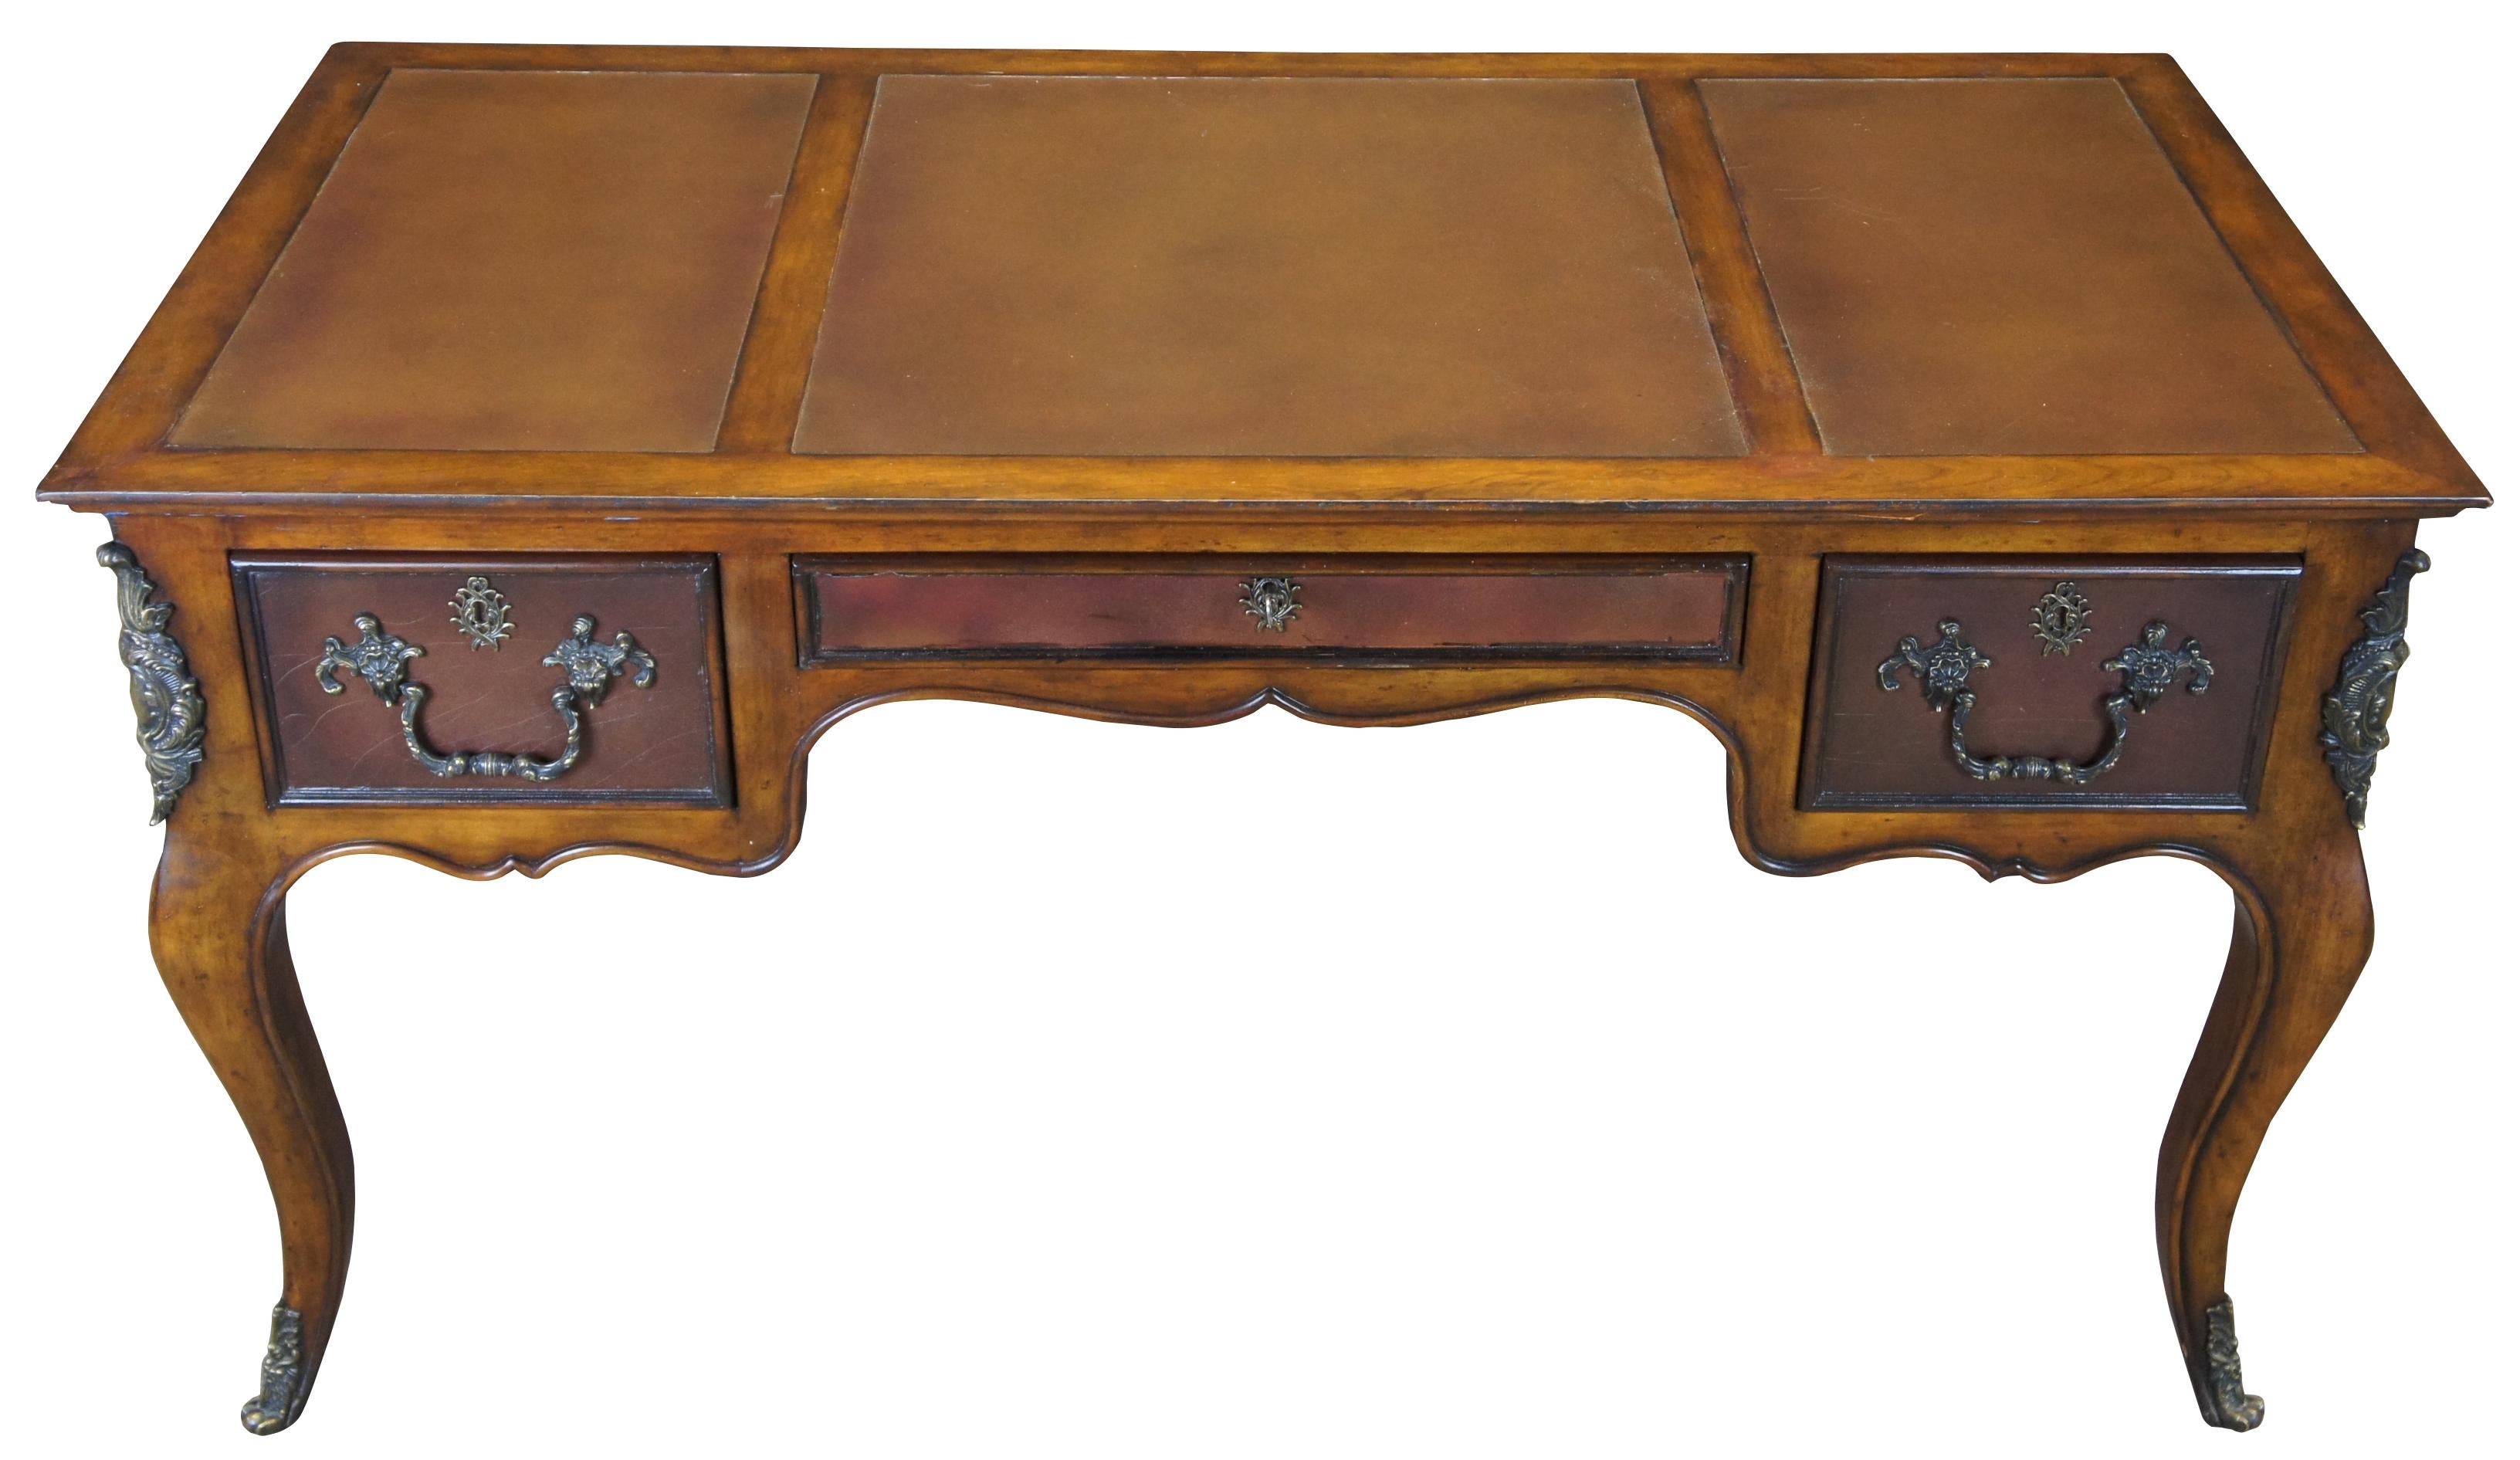 Drexel Heritage Home Office Aimer La Lettre Desk - Love Letter Desk 311-910. A beautiful writing desk with three drawers and two pull-out shelves (on the sides). The central drawer can be locked. The model is veneered with cherry veneer; the top is